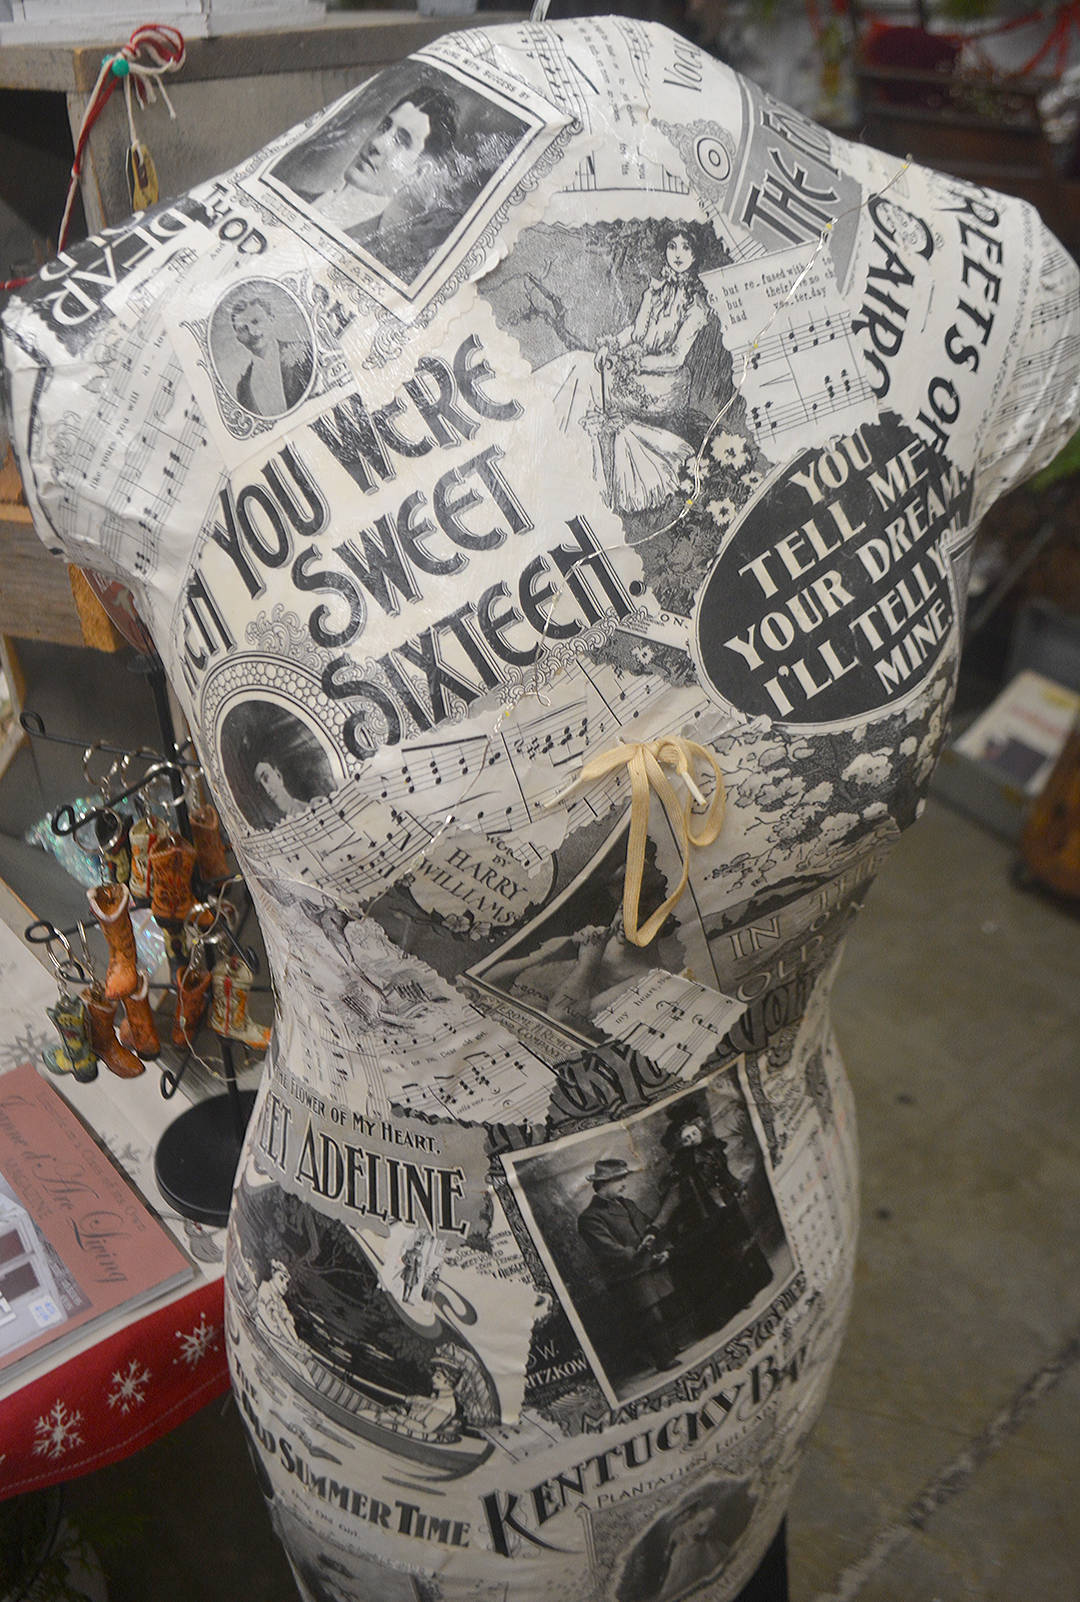 Sharon Trageser used old-style newspaper over a mannequin to make this artwork.